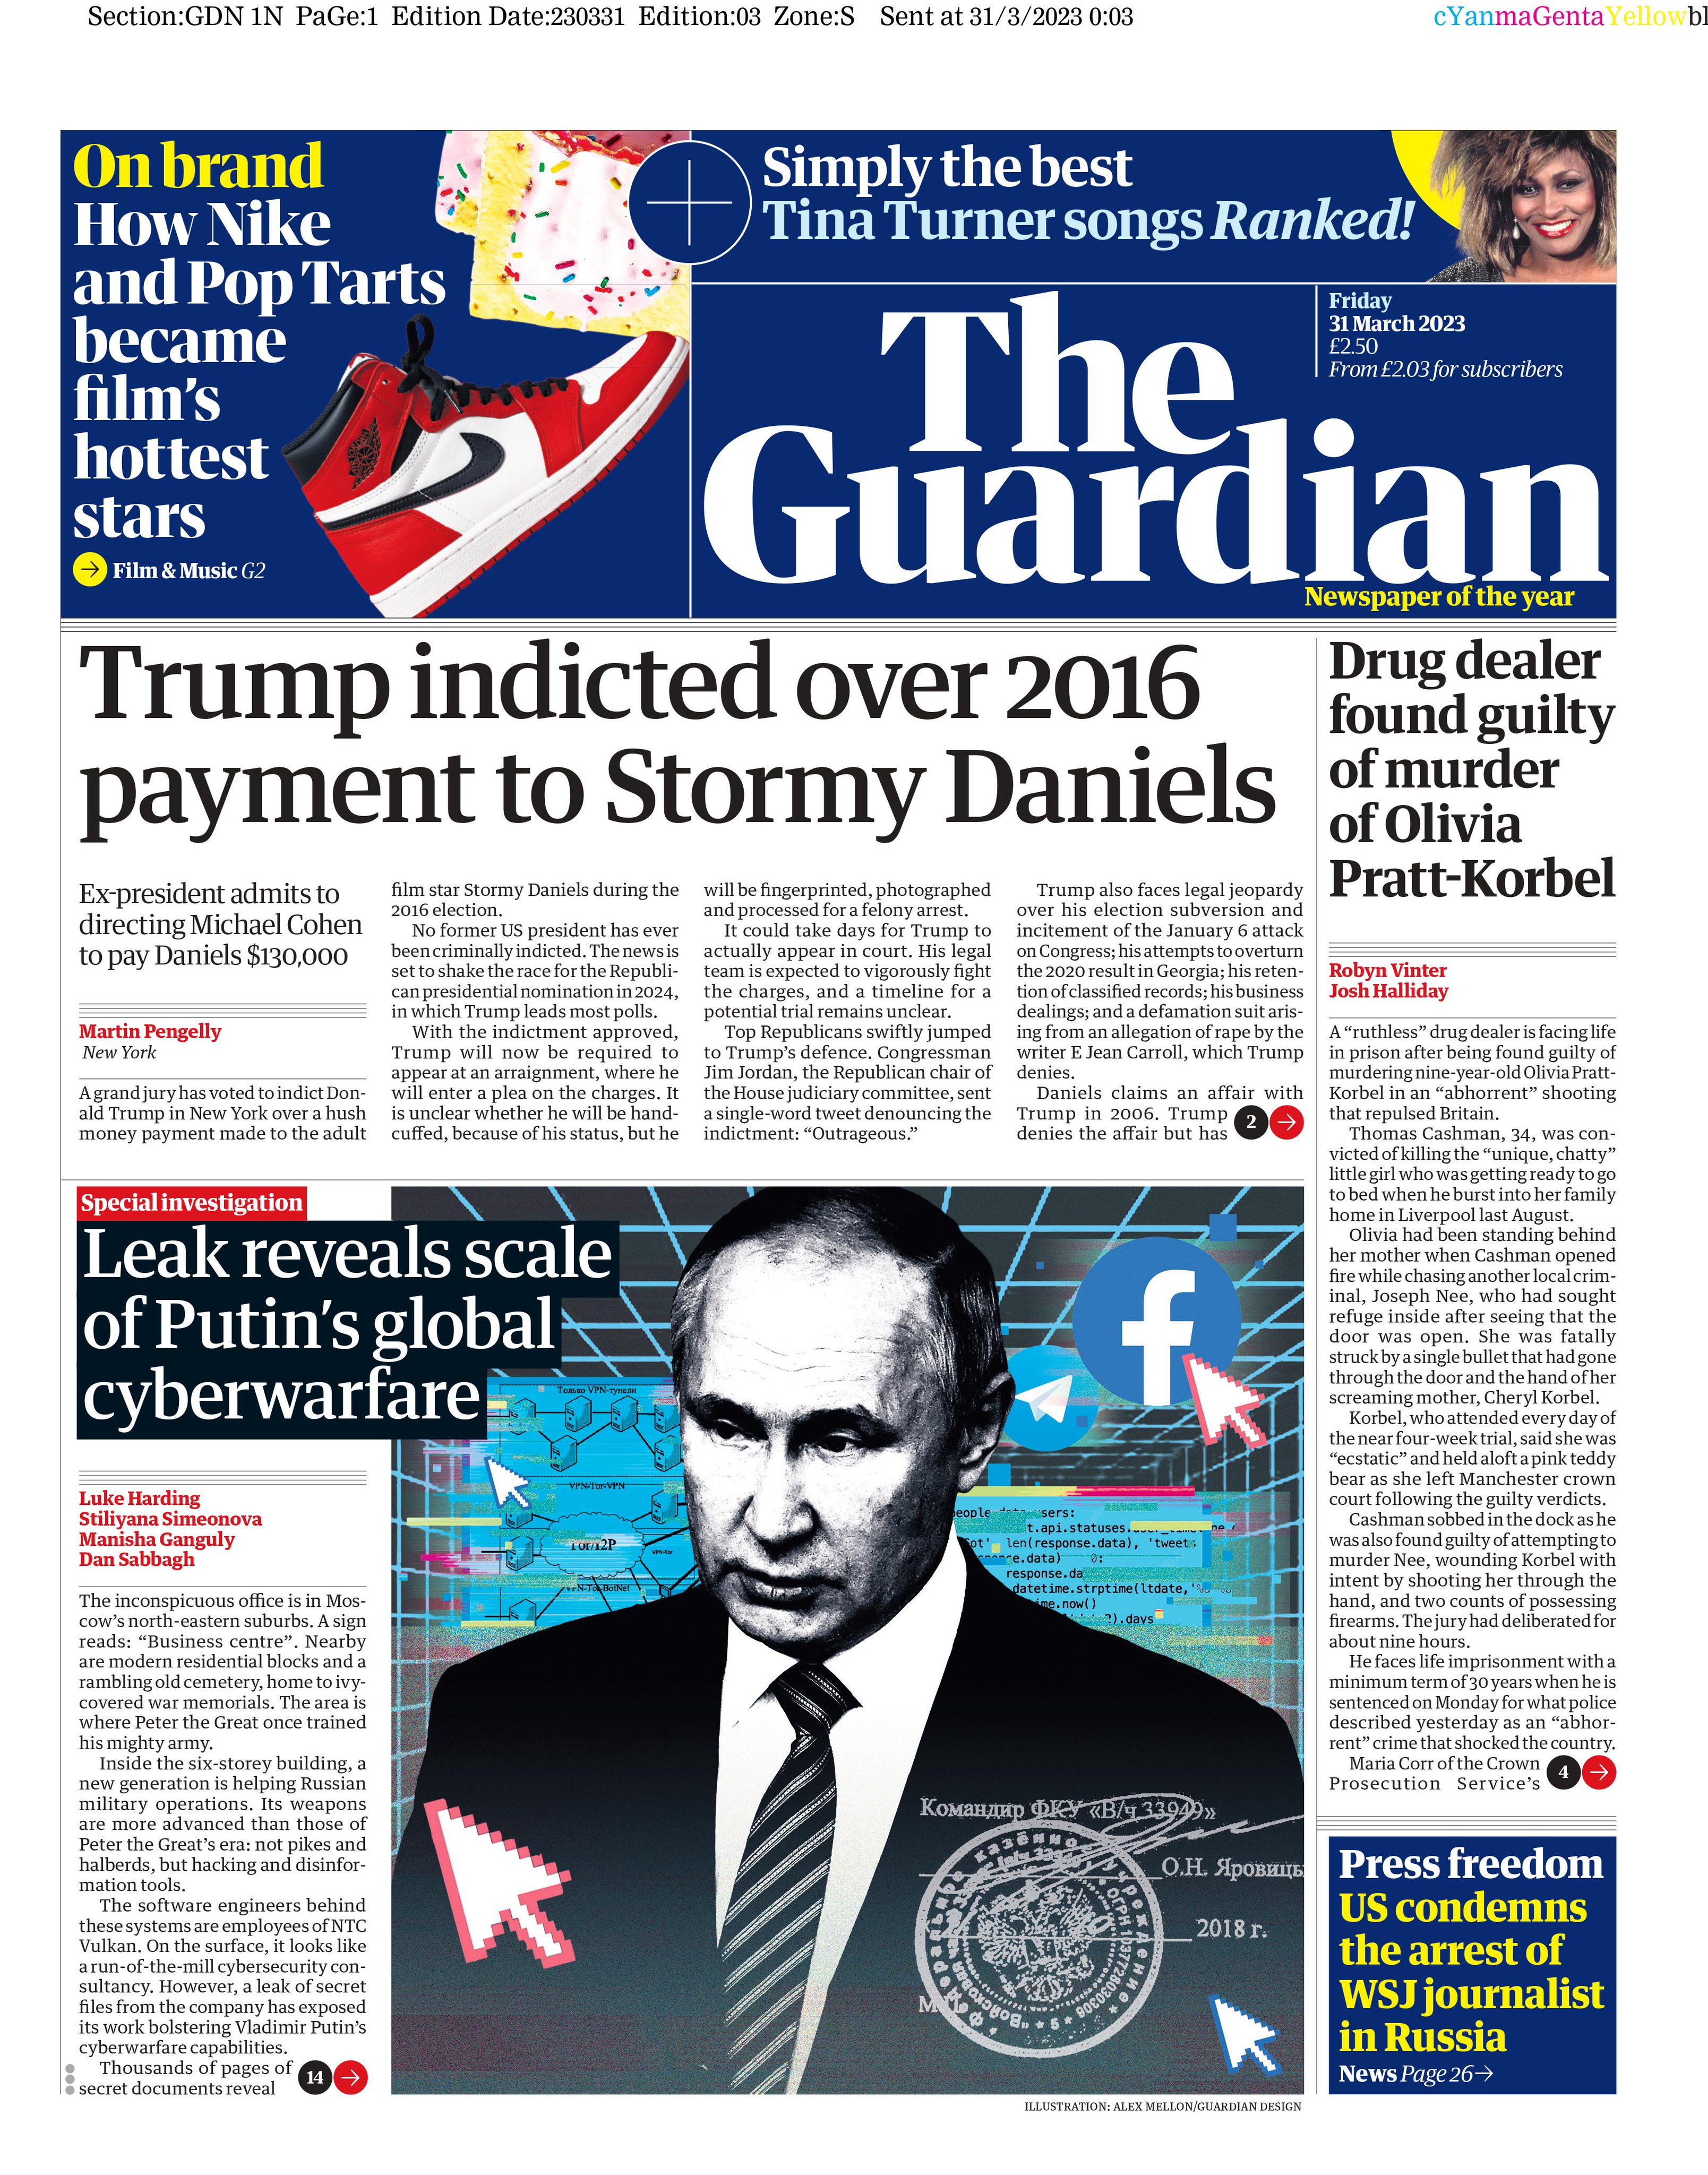 Trump indictment: Newspaper front pages